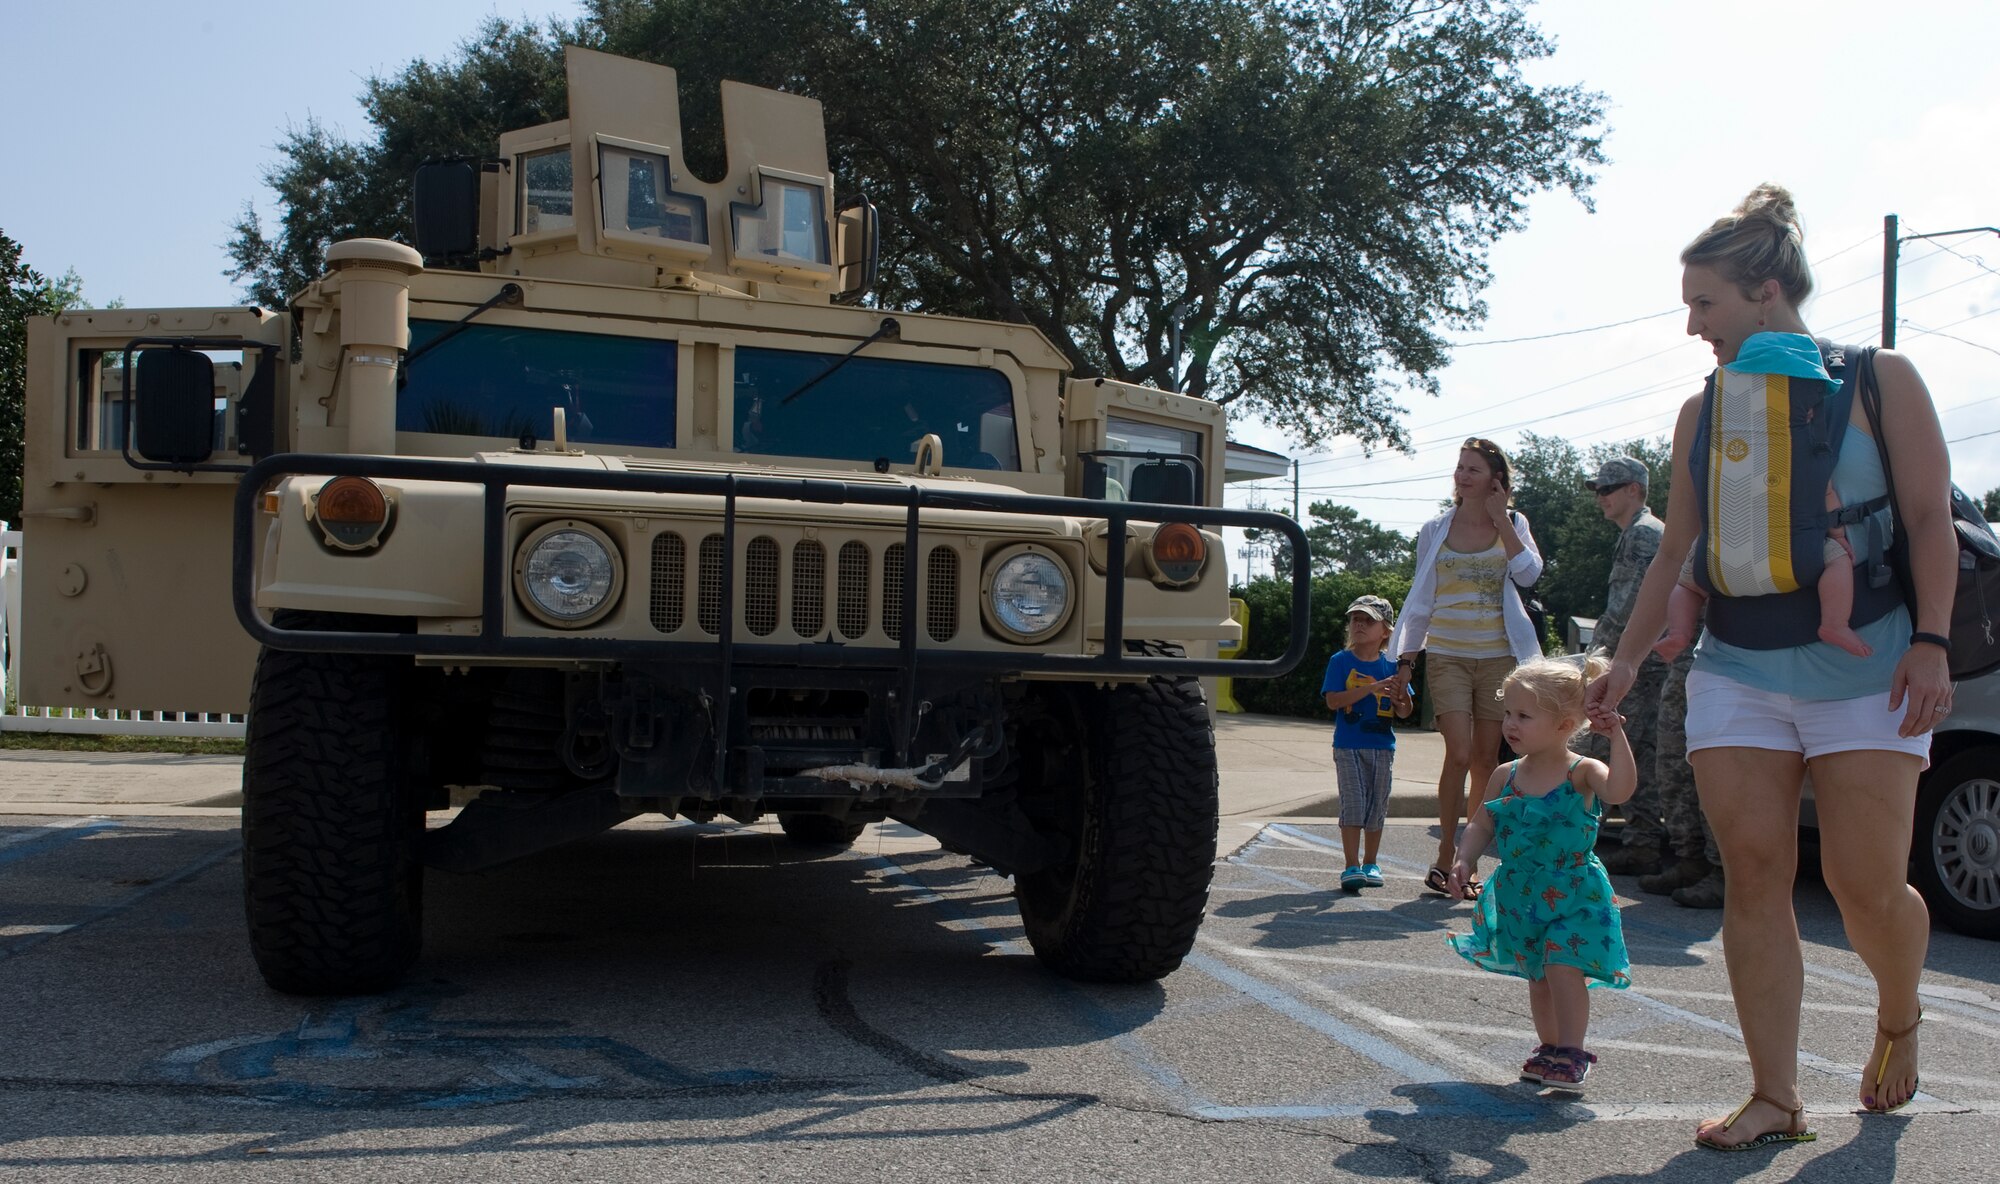 Families from the local community check out a 1st Special Operations Civil Engineer Squadron Humvee during the 16th Annual Truck Day at the Destin Community Center in Destin, Fla., Aug. 7, 2014. The event featured vehicles from various businesses and services from around the Emerald Coast. (U.S. Air Force photo/Senior Airman Kentavist P. Brackin)